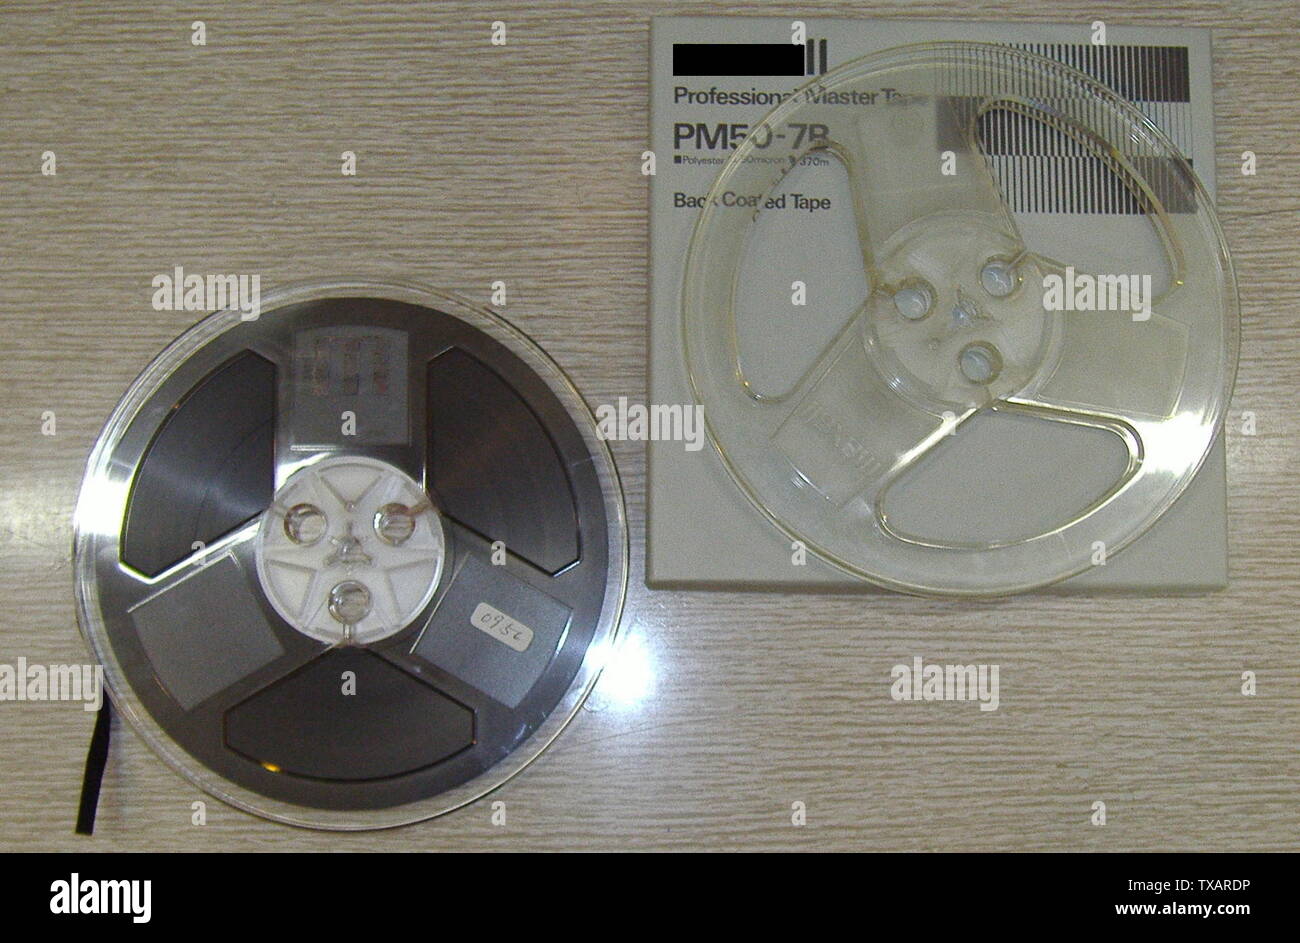 Magnetic audio tape & reel. size  7 inch (diameter); 26 January 2006Â (according to Exif data); Own work; Toki-ho; Stock Photo